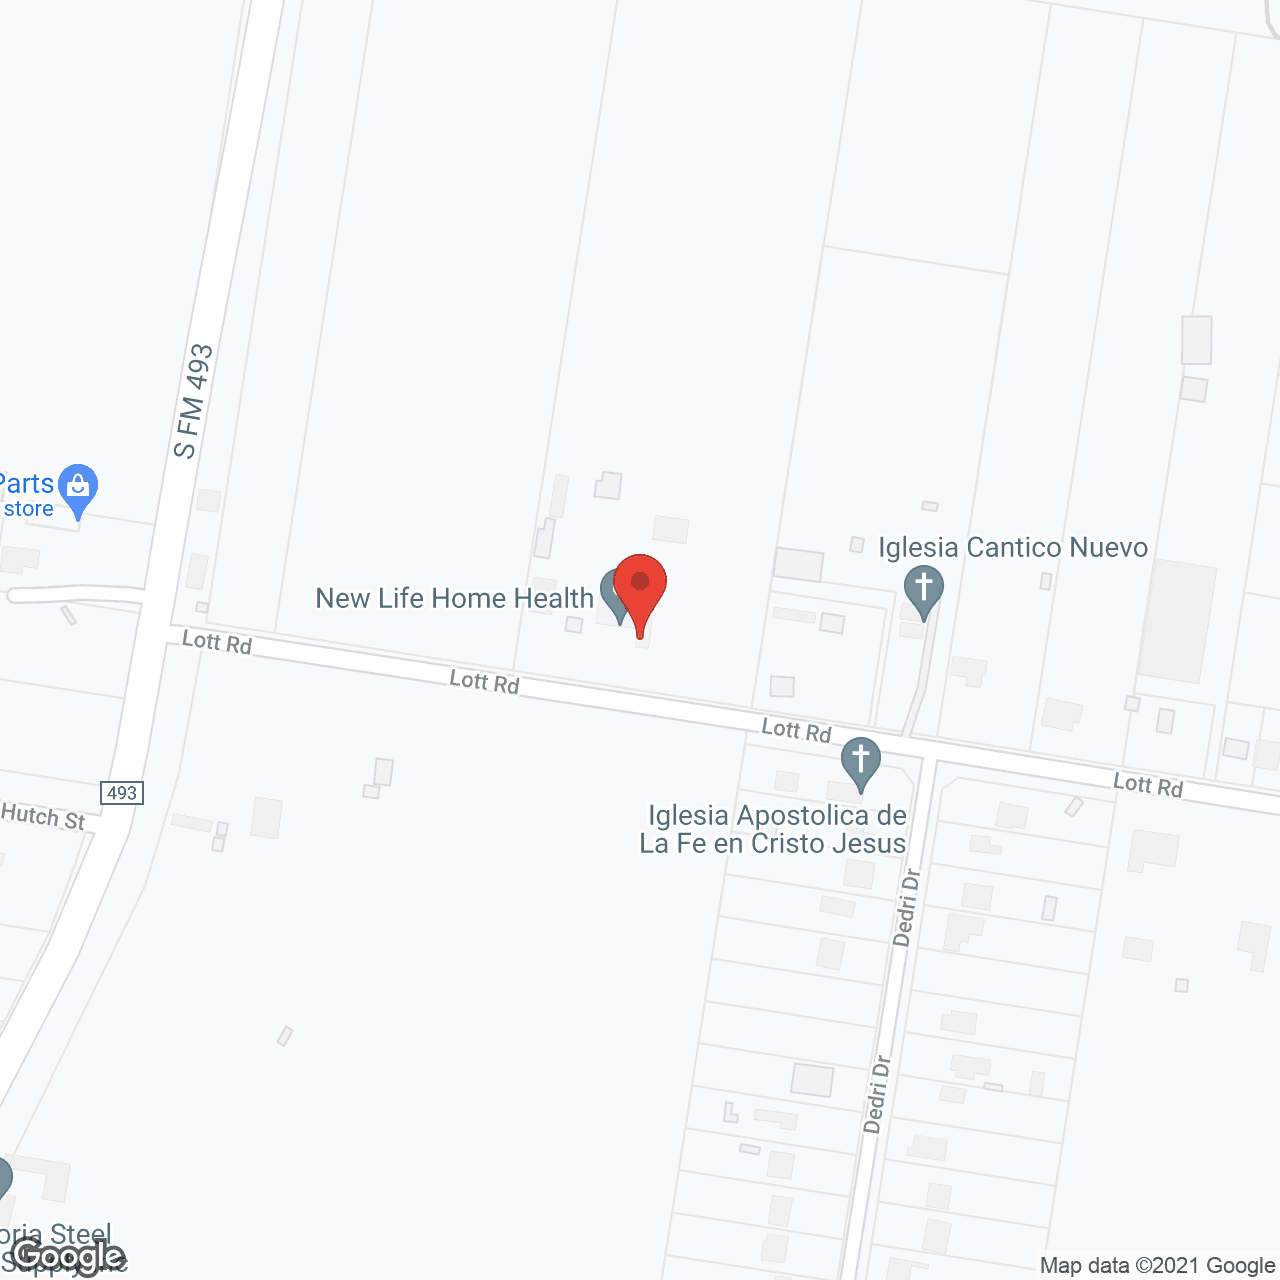 New Life Home Health Services in google map